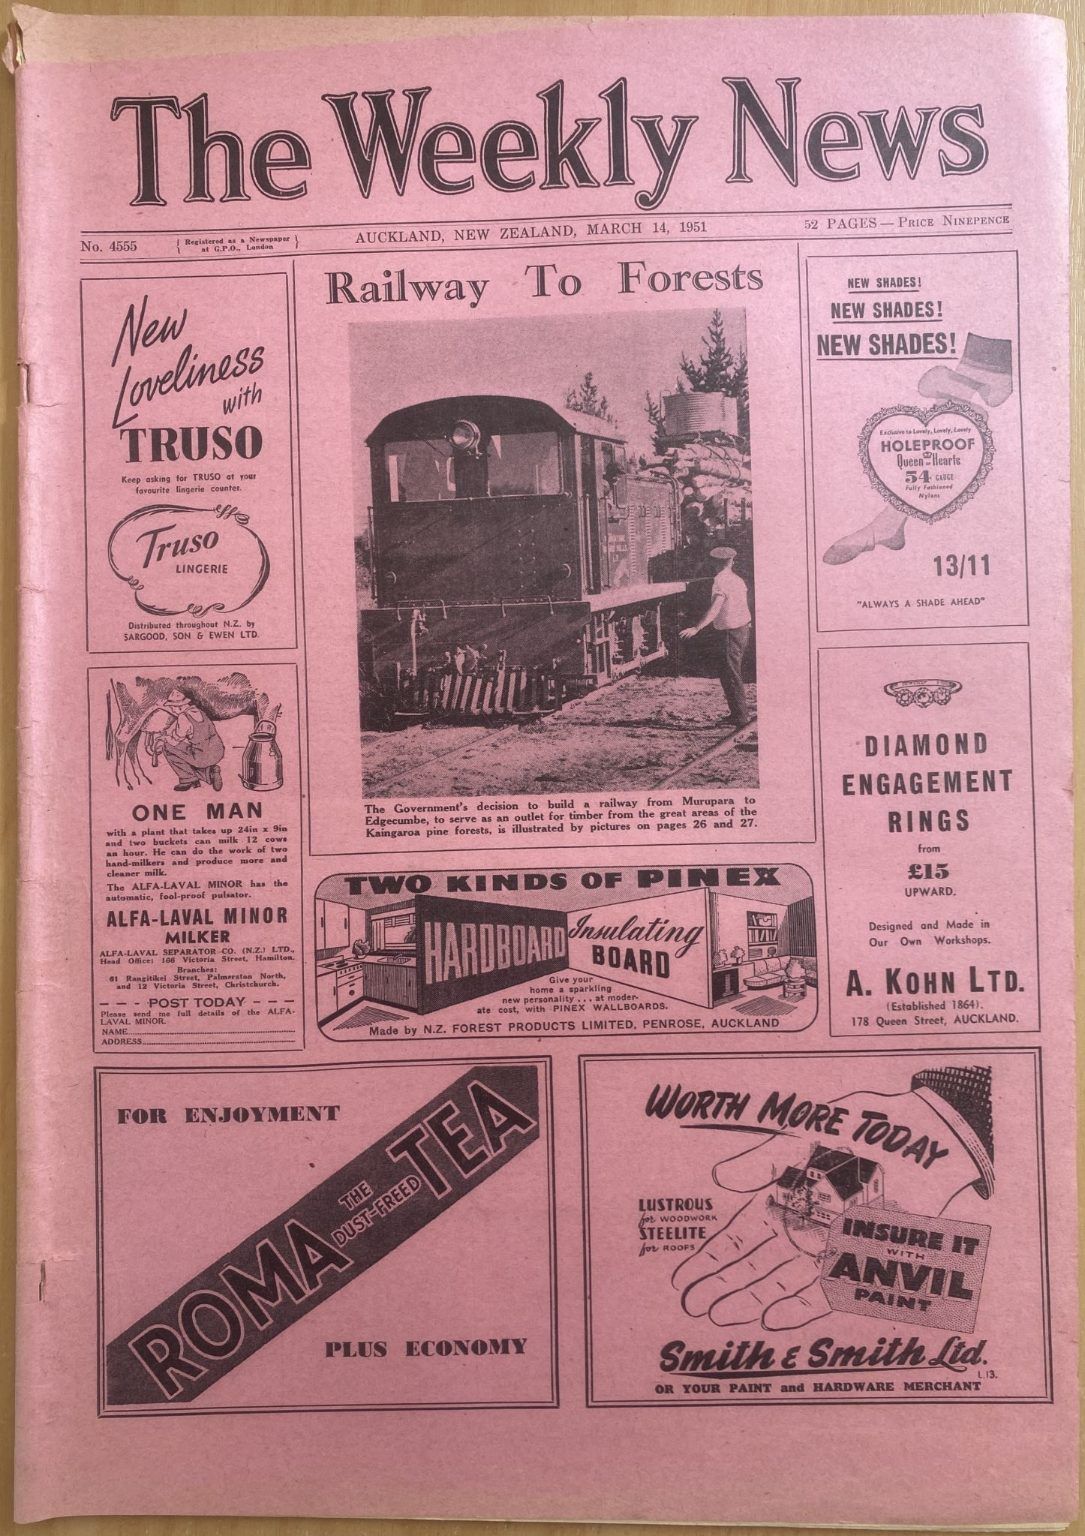 OLD NEWSPAPER: The Weekly News, No. 4555, 14 March 1951